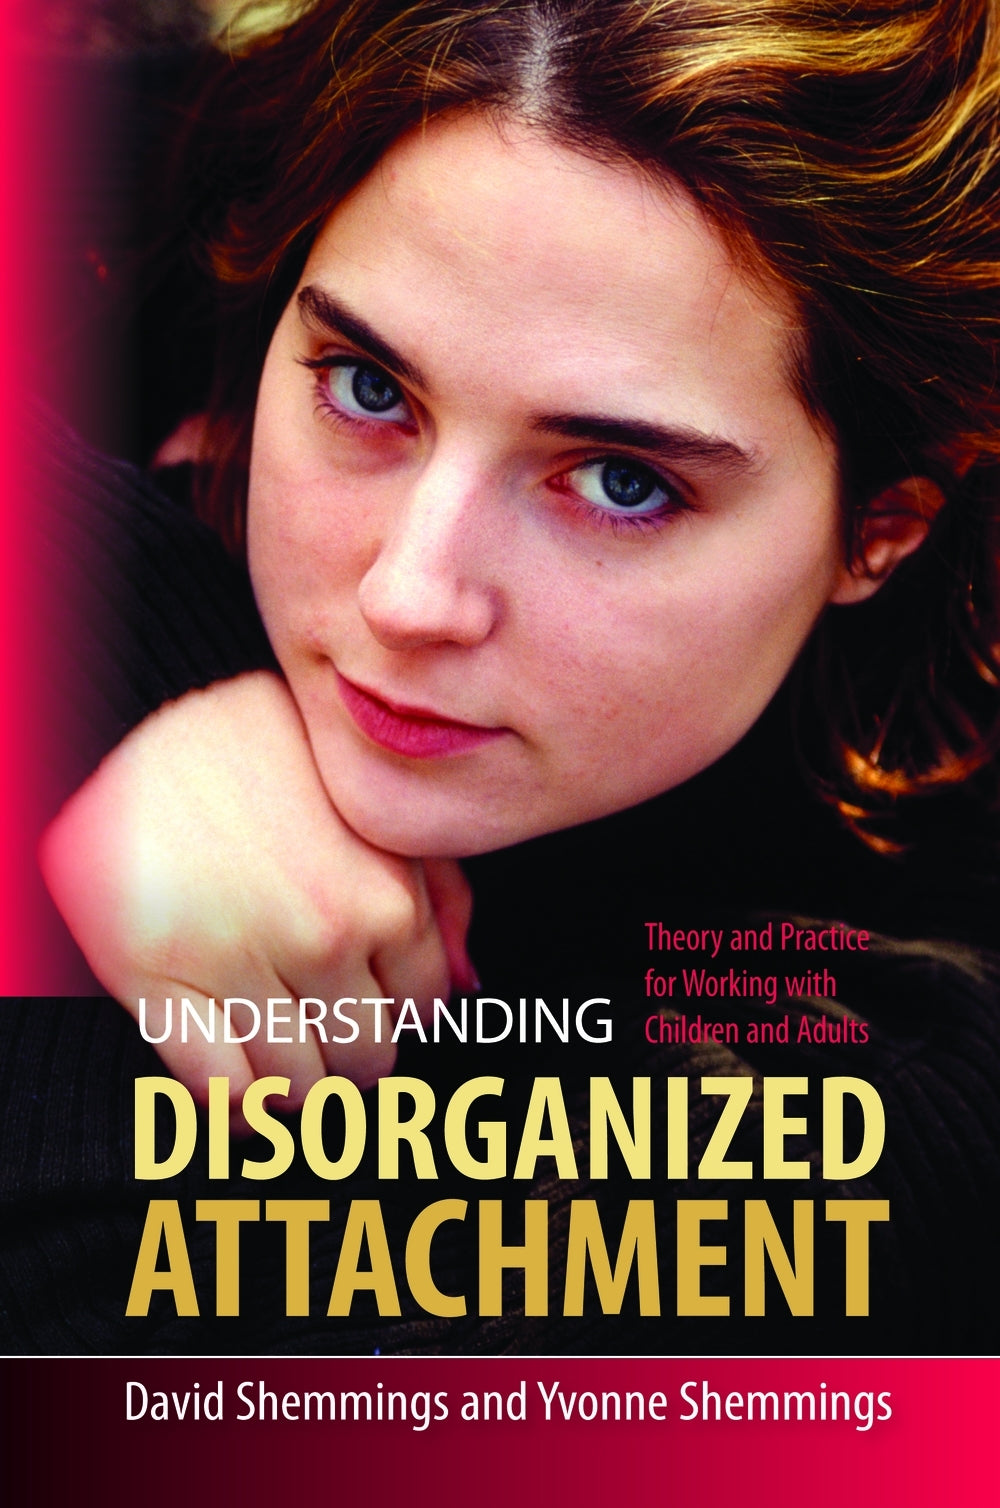 Understanding Disorganized Attachment by David Shemmings, Yvonne Shemmings